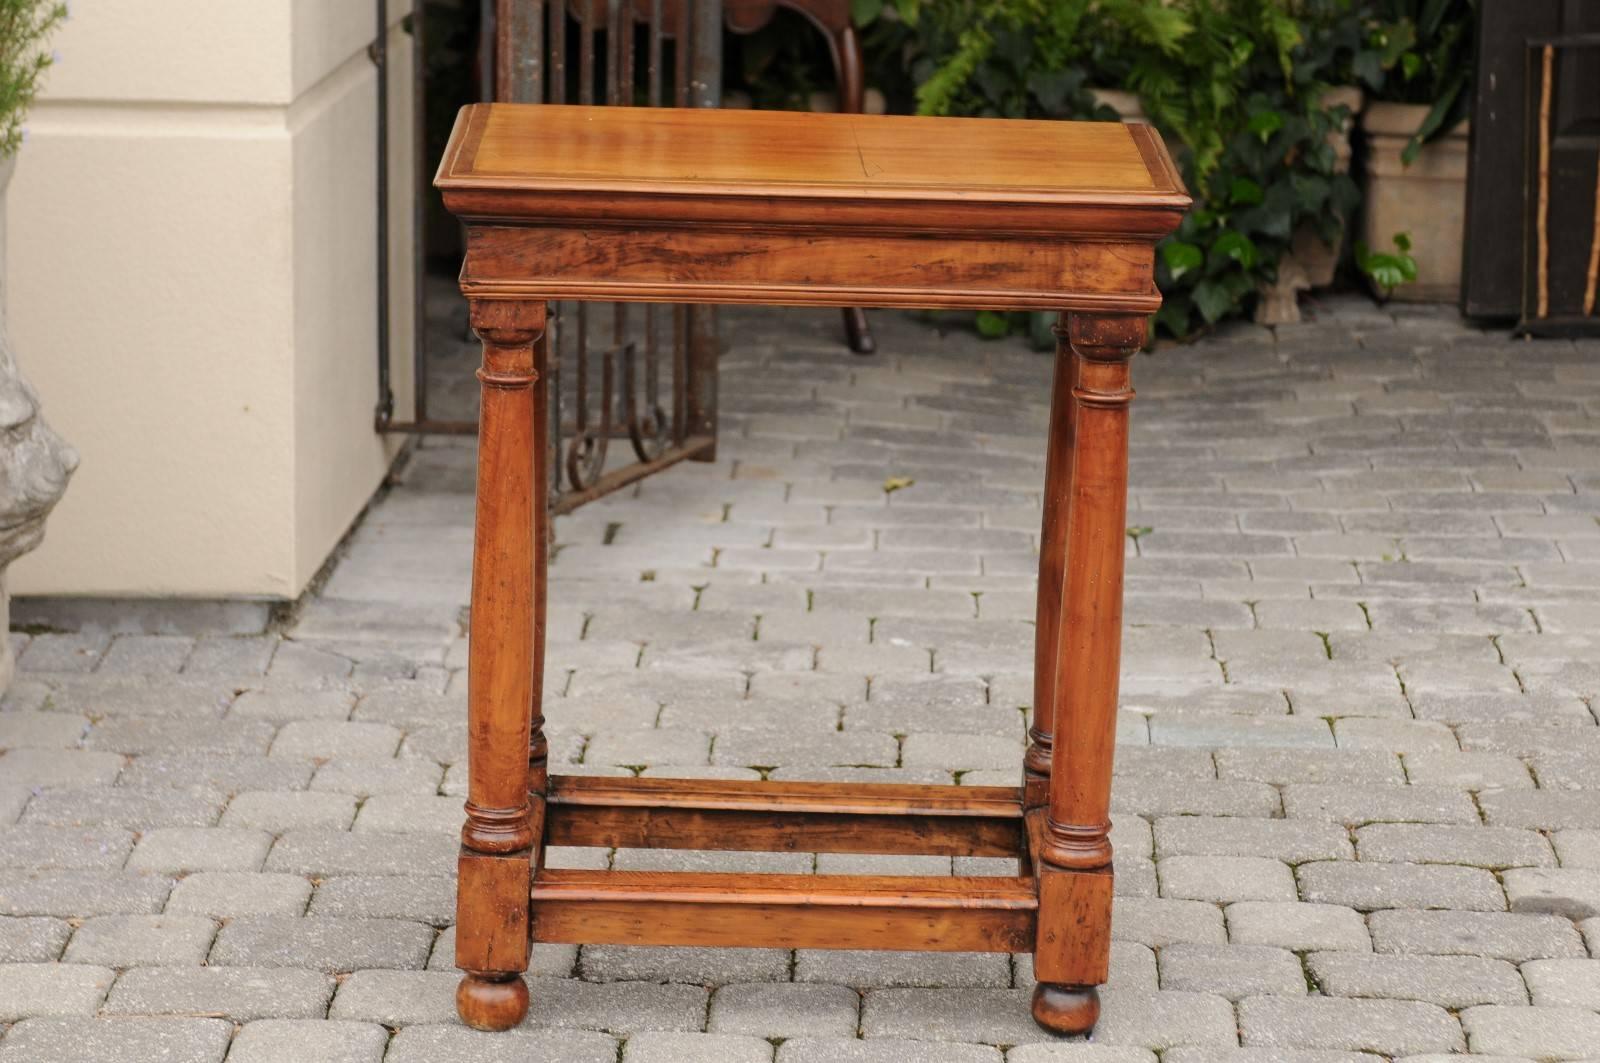 French Empire Style Mid-19th Century Fruitwood Side Table with Doric Column Legs For Sale 6